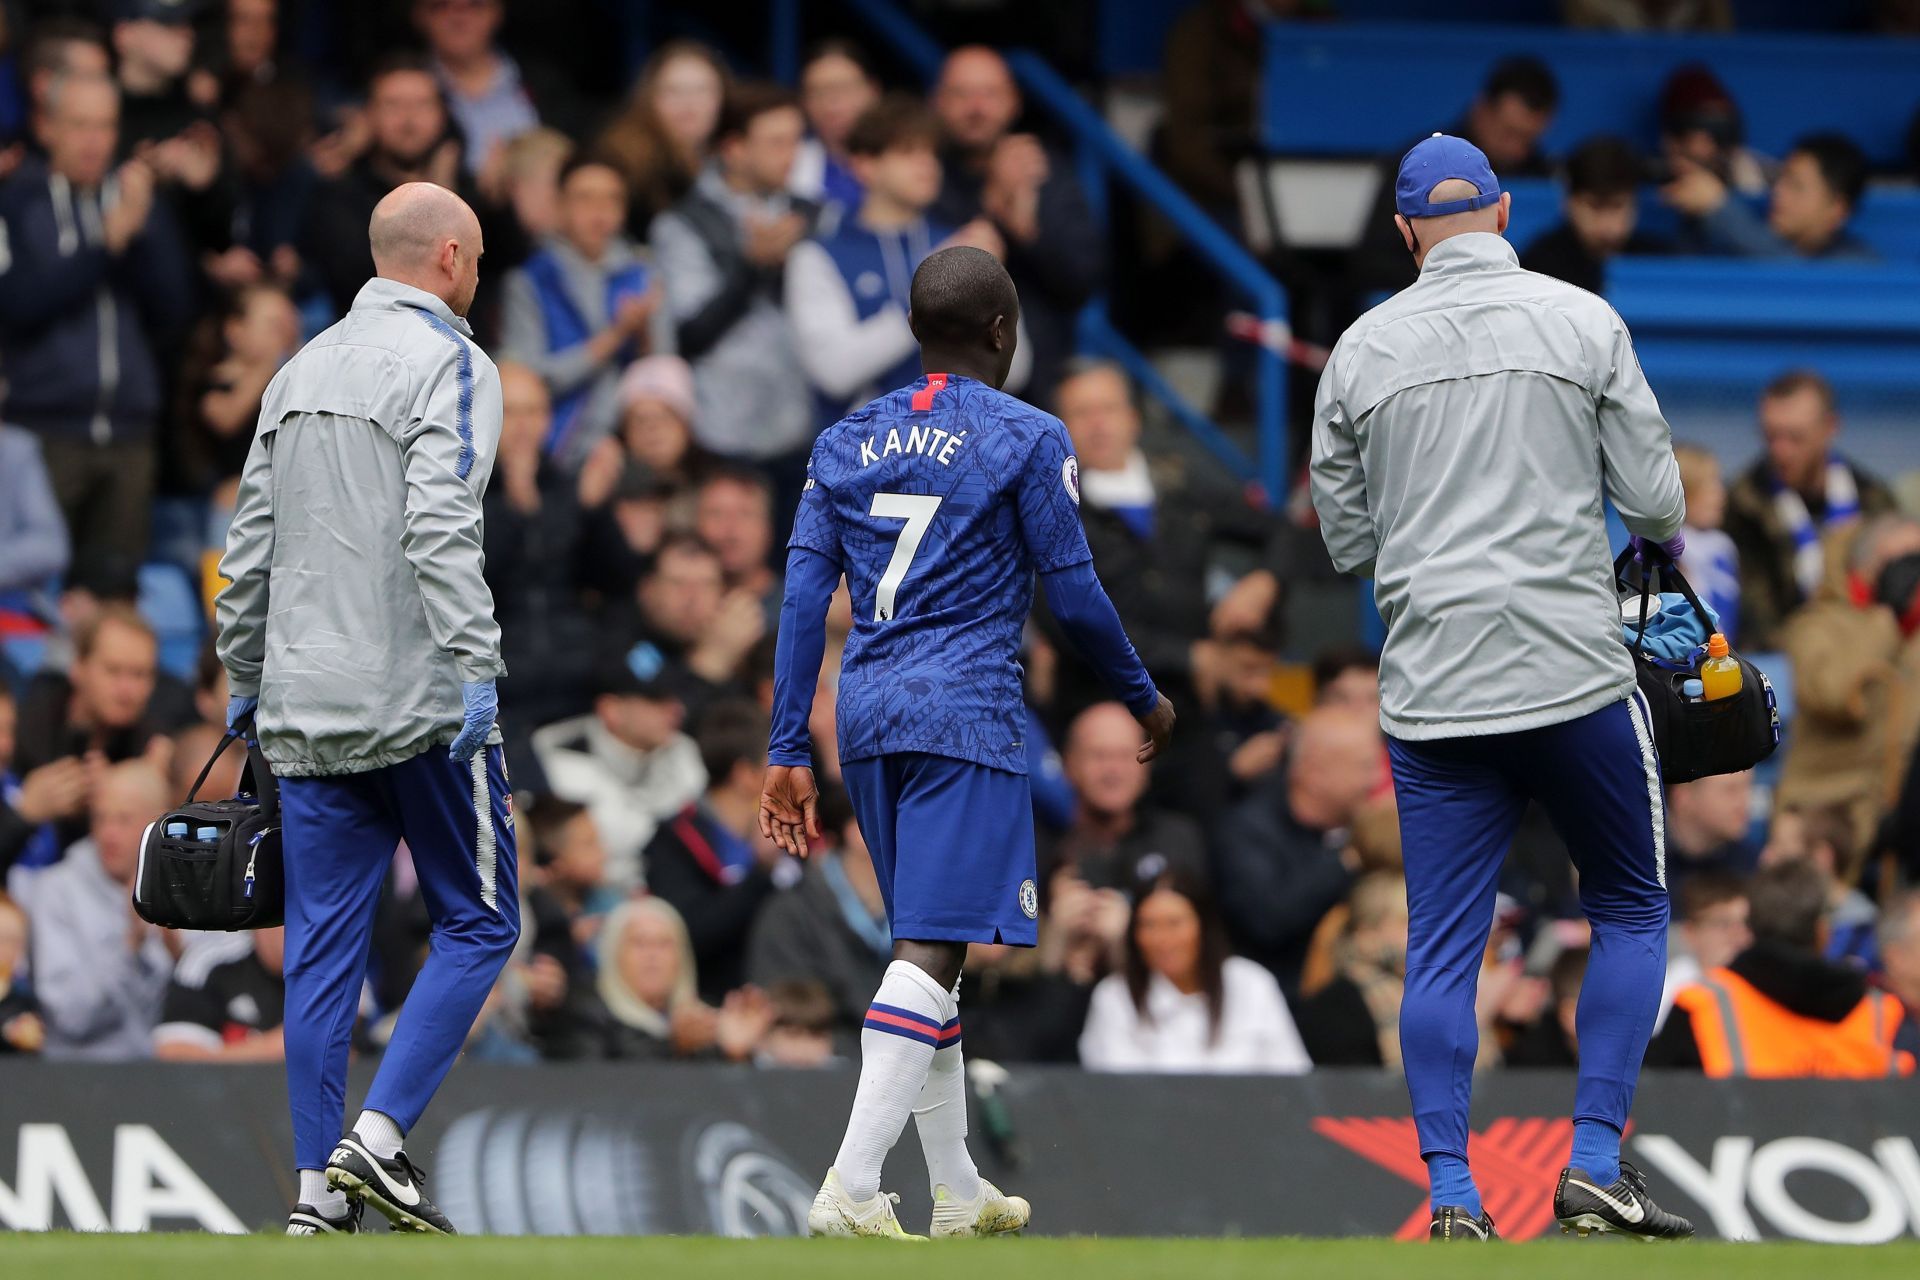 Kante has struggled with injuries in recent seasons